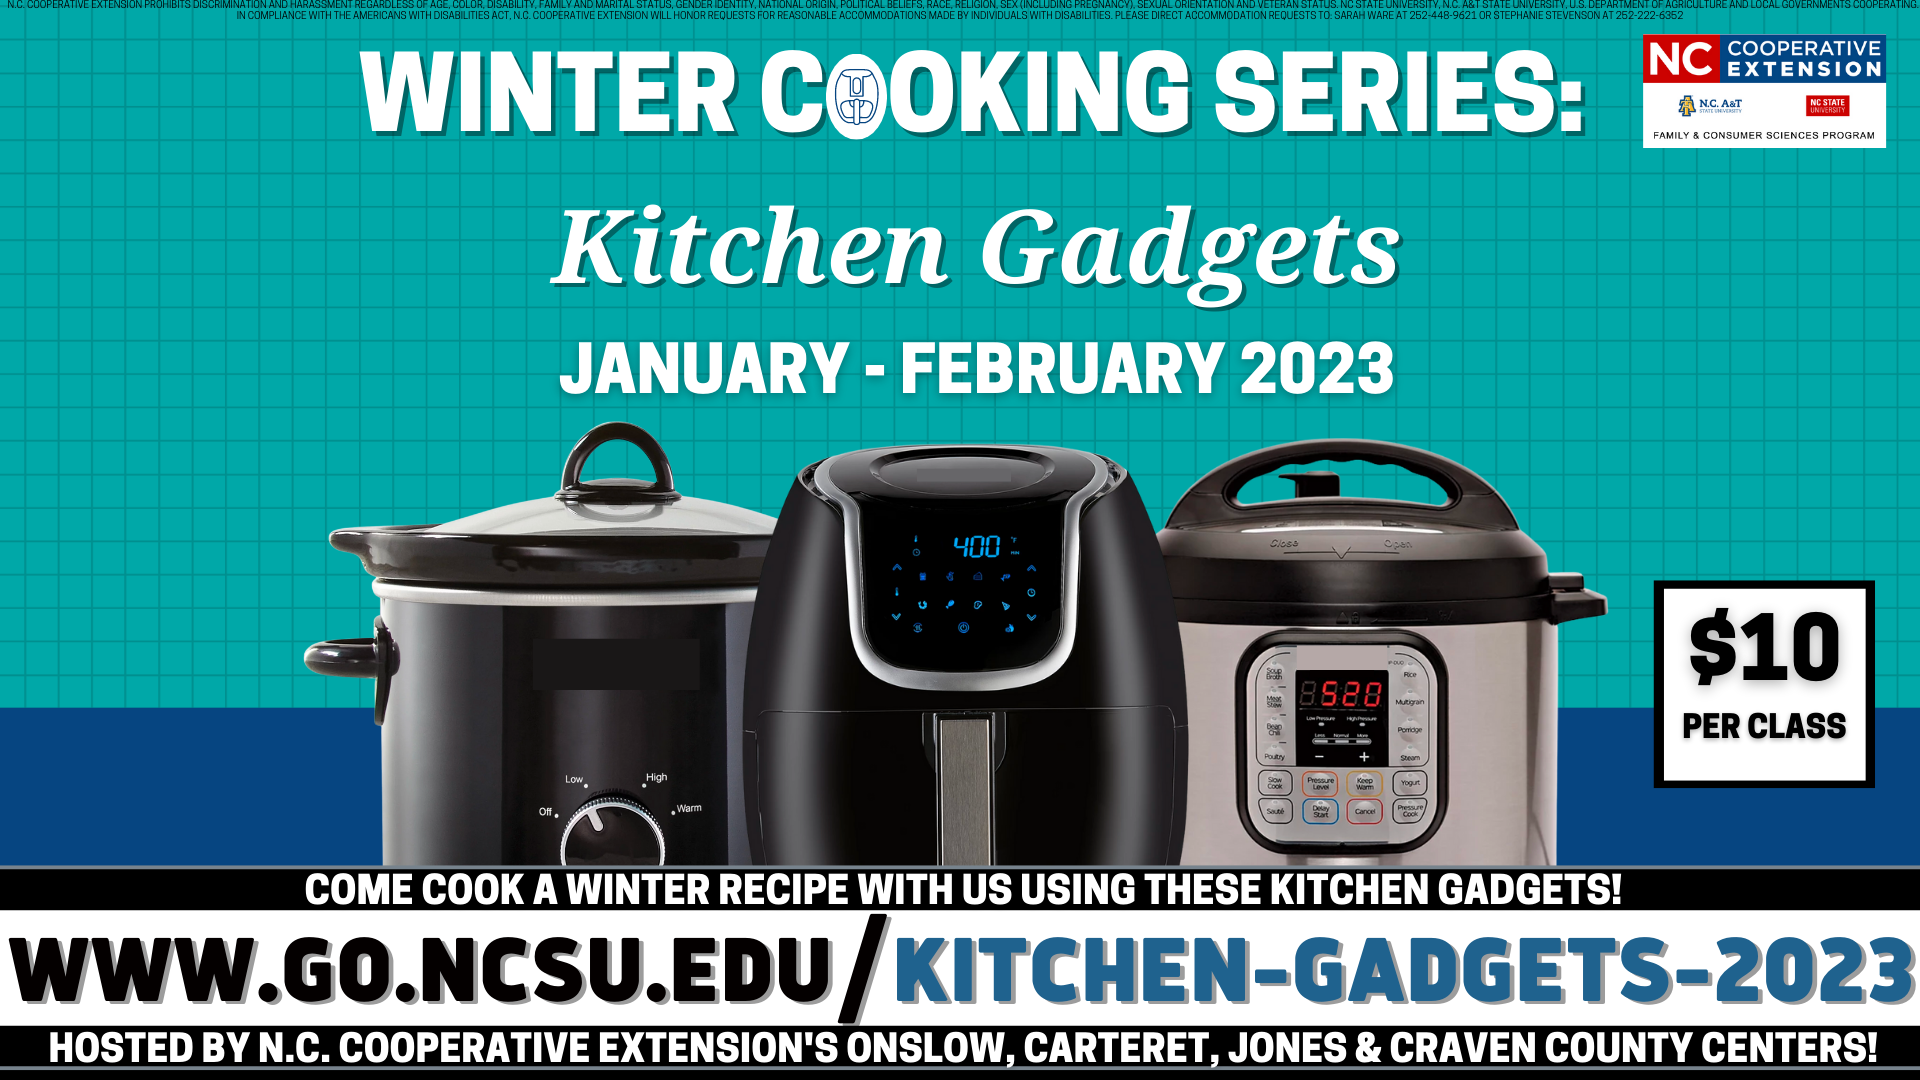 Winter Cooking Series: Kitchen Gadgets. January - February 2023